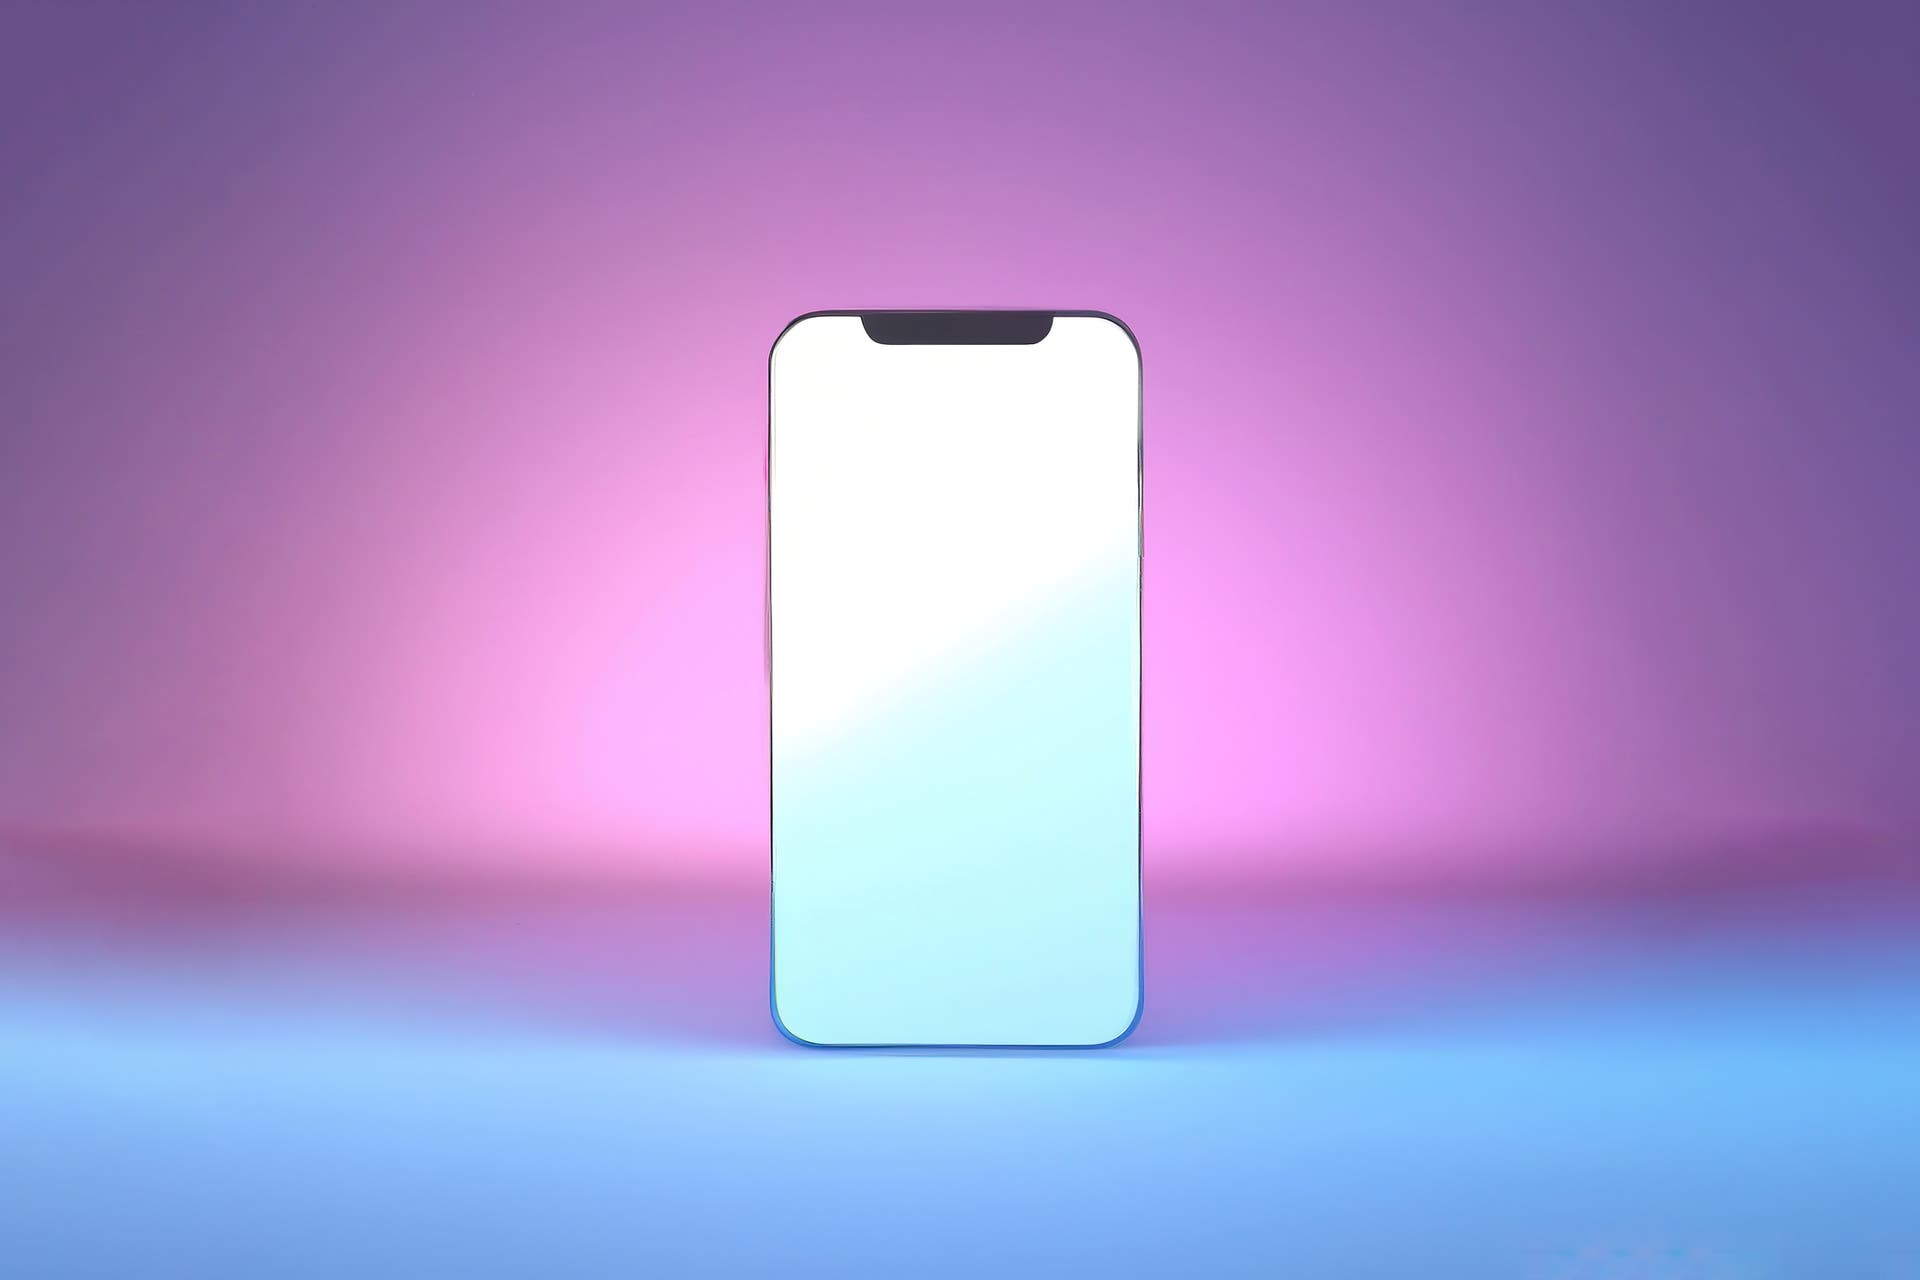  Smartphone on pink background 